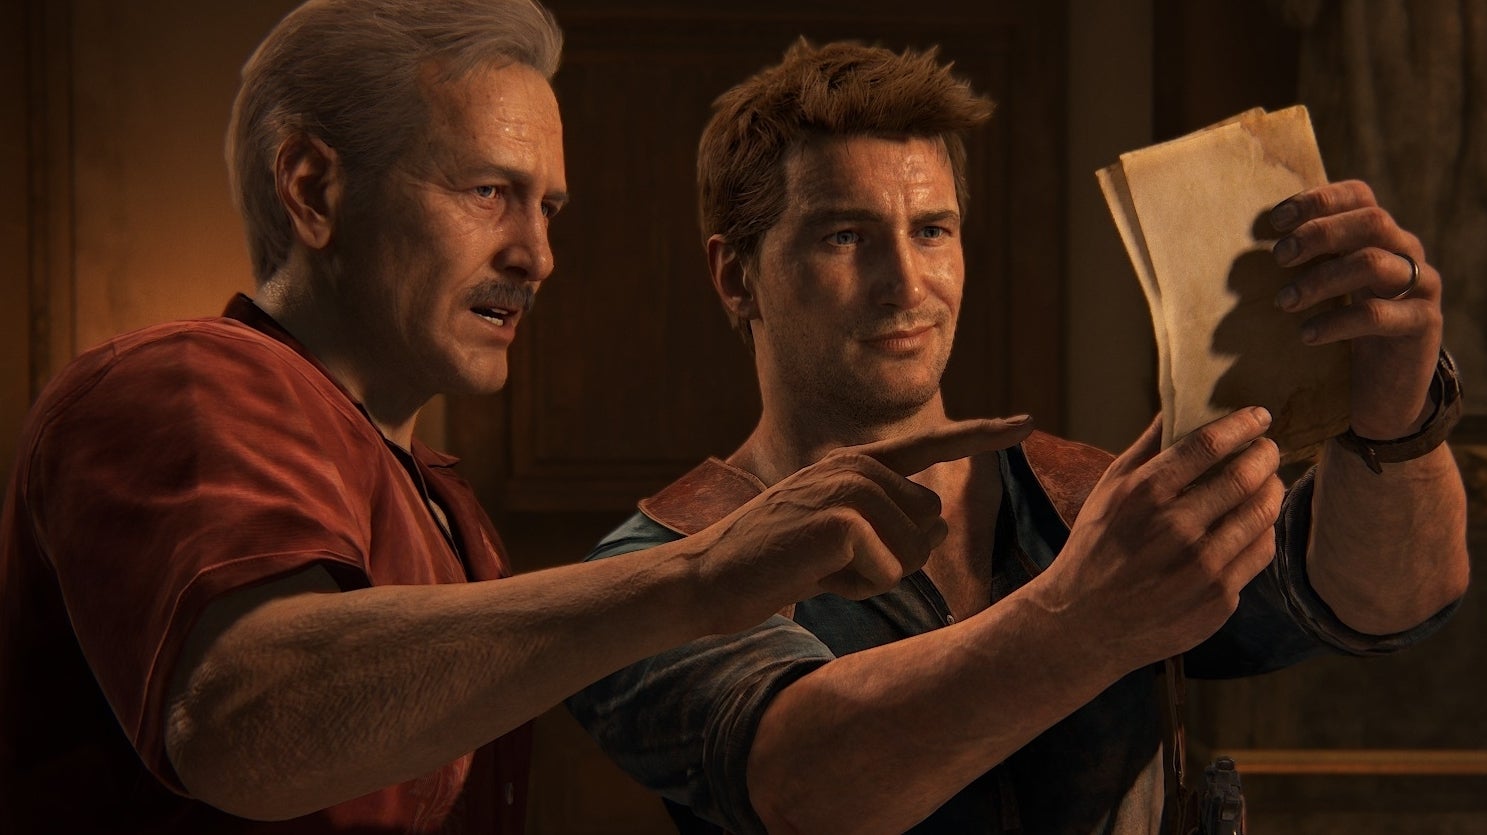 Image for Sony's Uncharted movie gets its seventh director